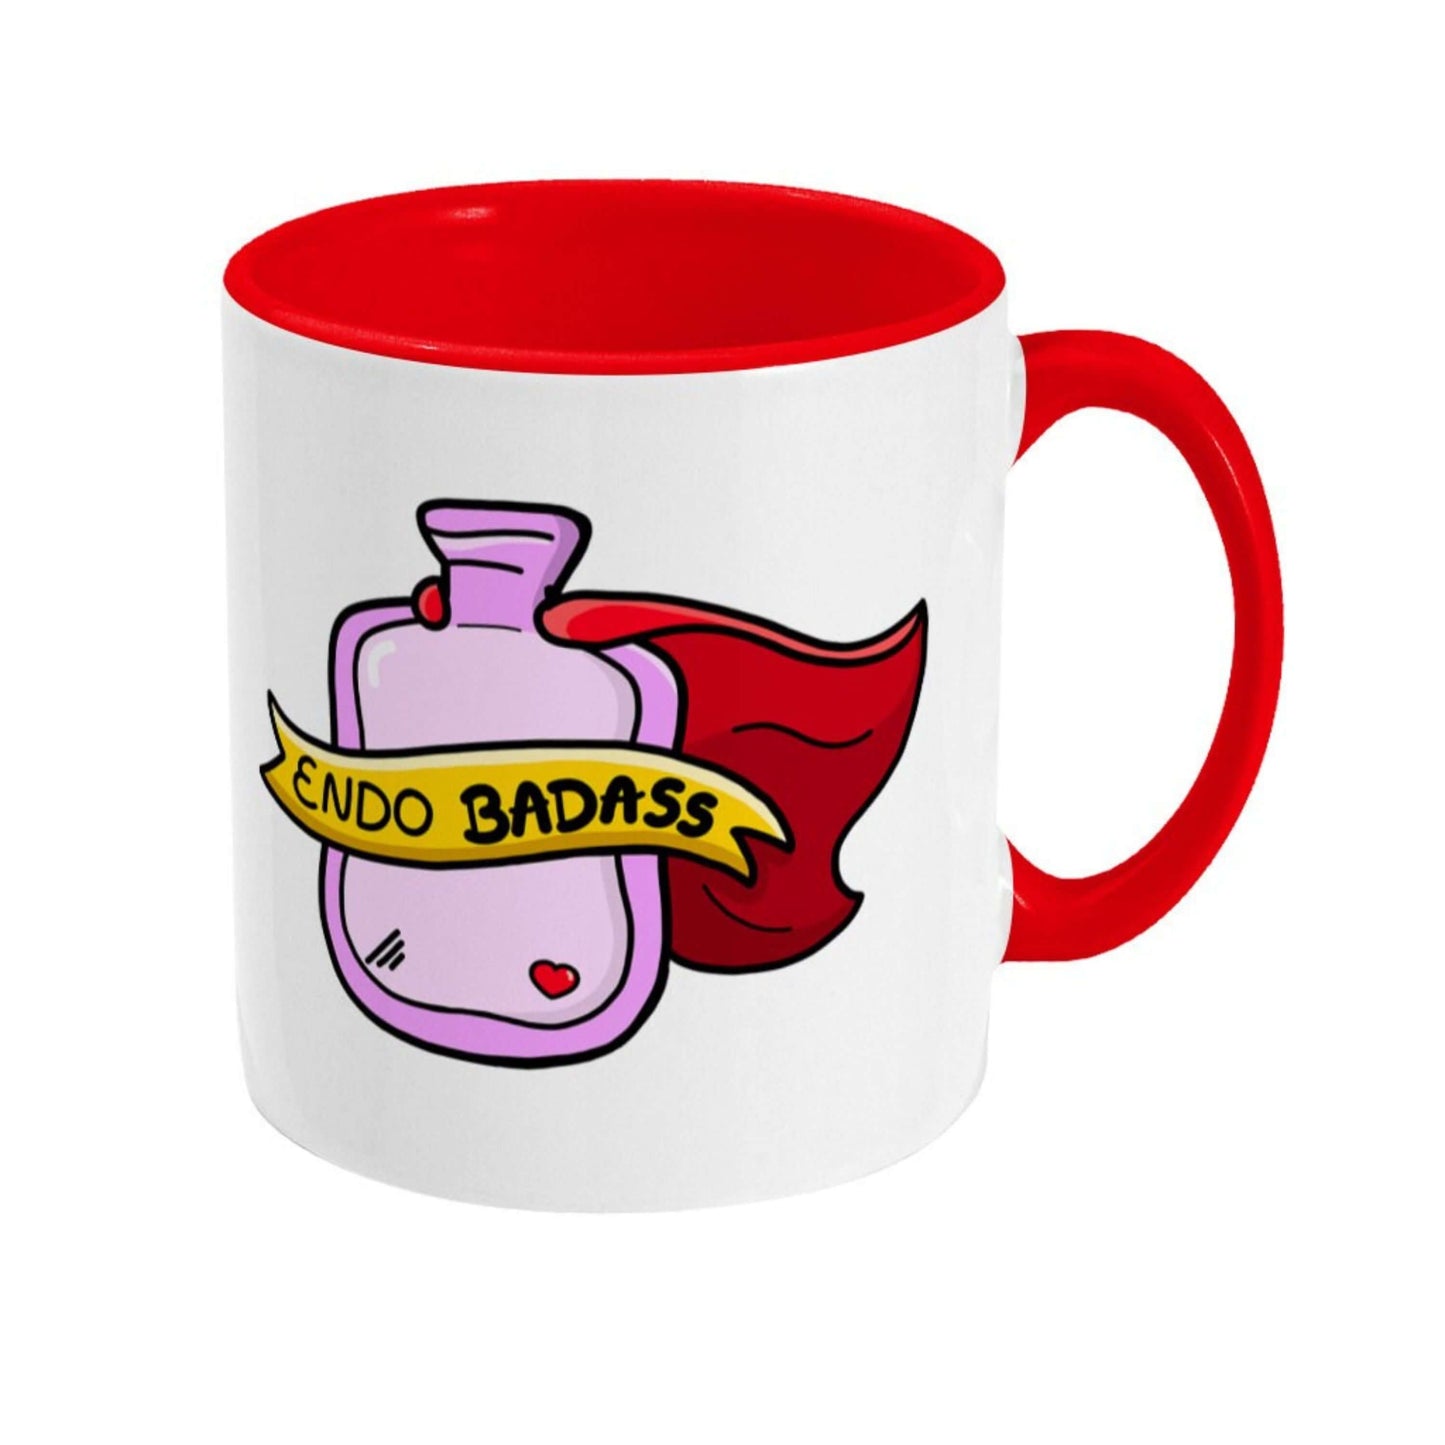 Endo Badass Mug - Endometriosis shown on a white background. The white mug has a red handle and inside with an illustration of a pink hot water bottle wearing a red cape. There is a yellow banner across the bottle with black text inside that reads 'endo badass'. Hand drawn design made to raise awareness for endometriosis.